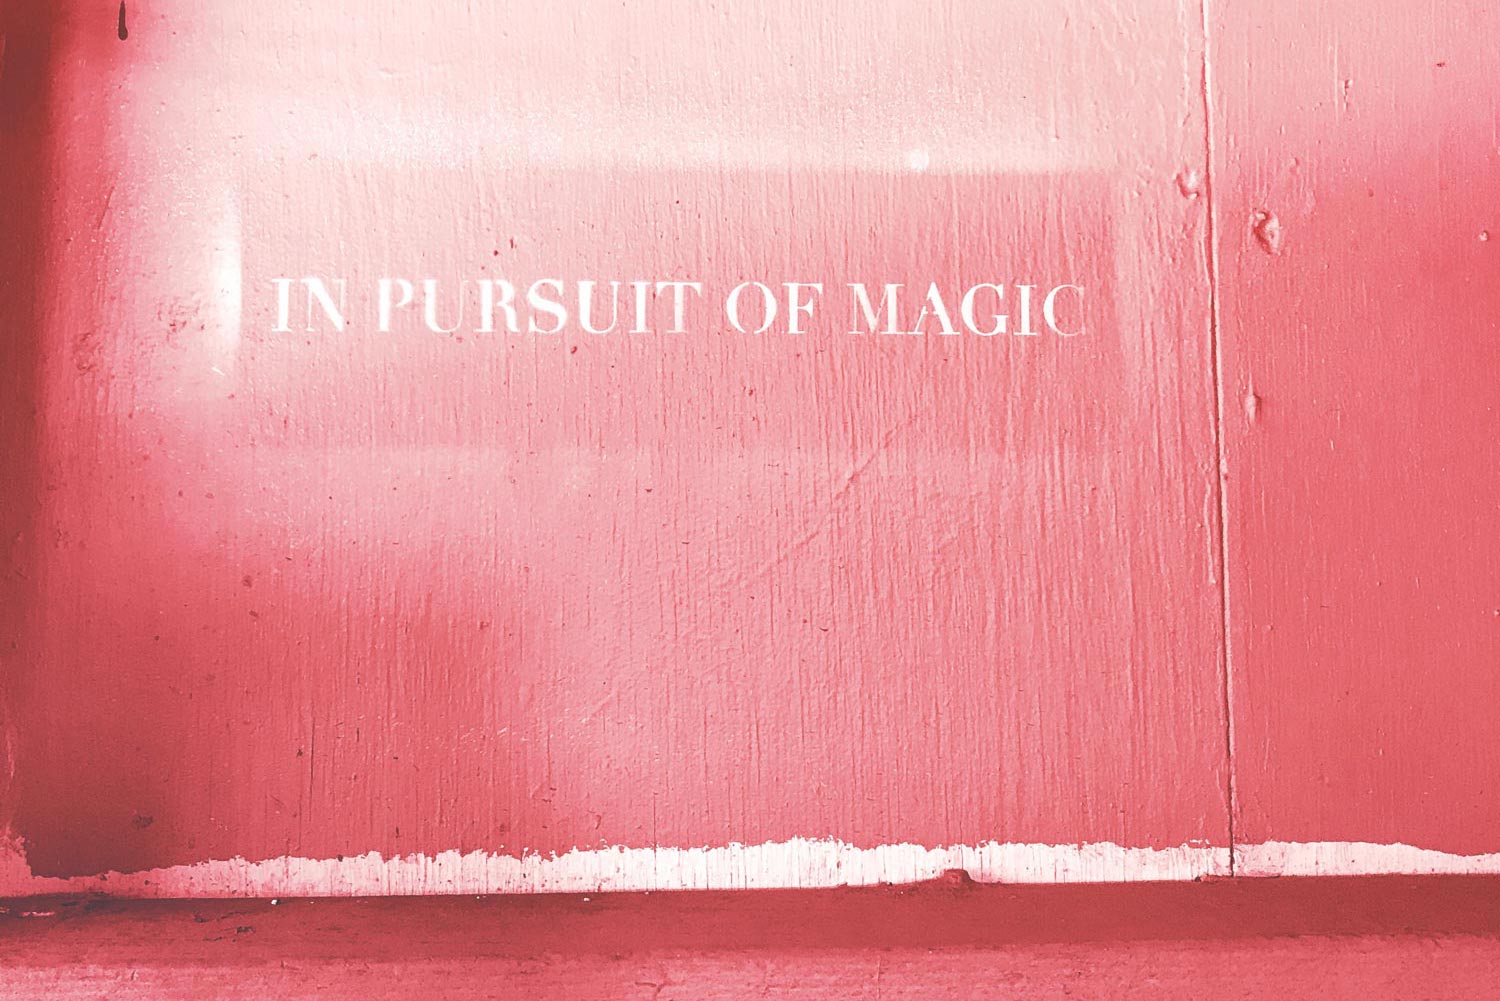 White graffiti of "In pursuit of magic" stenciled onto a red wood wall